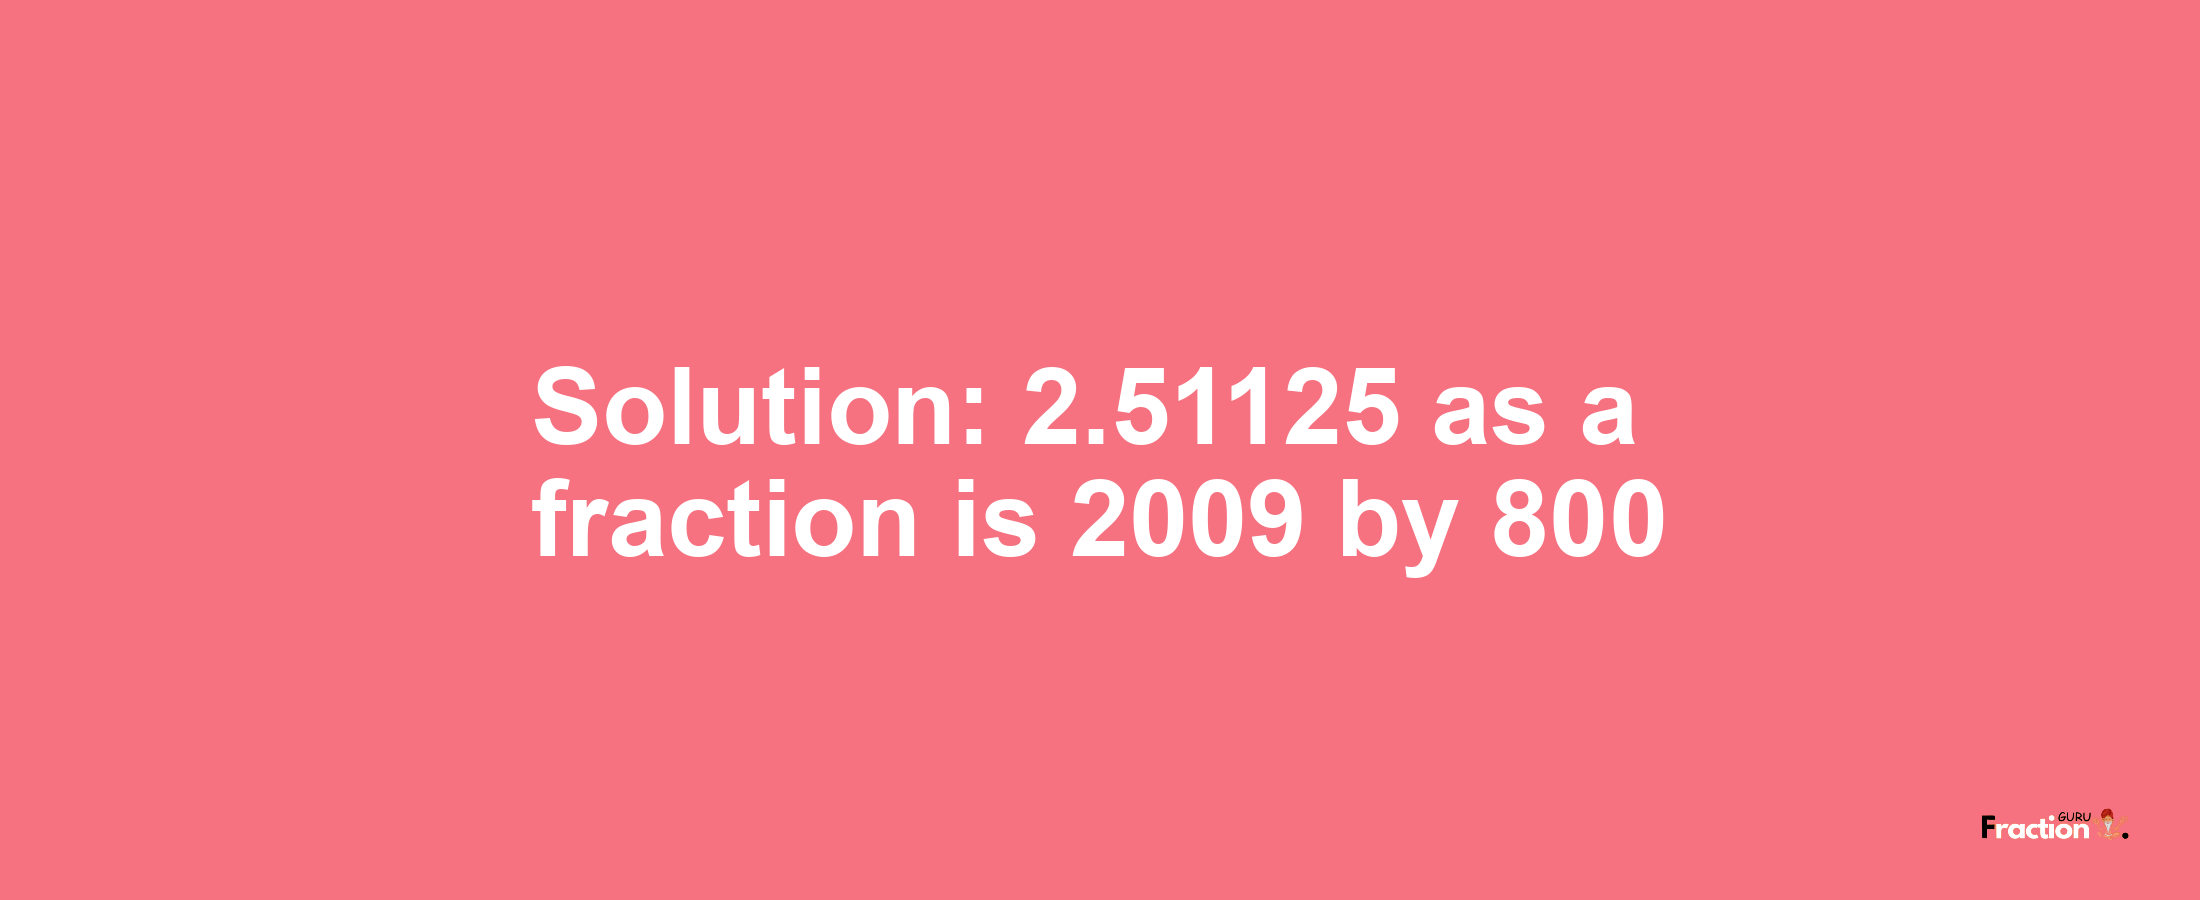 Solution:2.51125 as a fraction is 2009/800